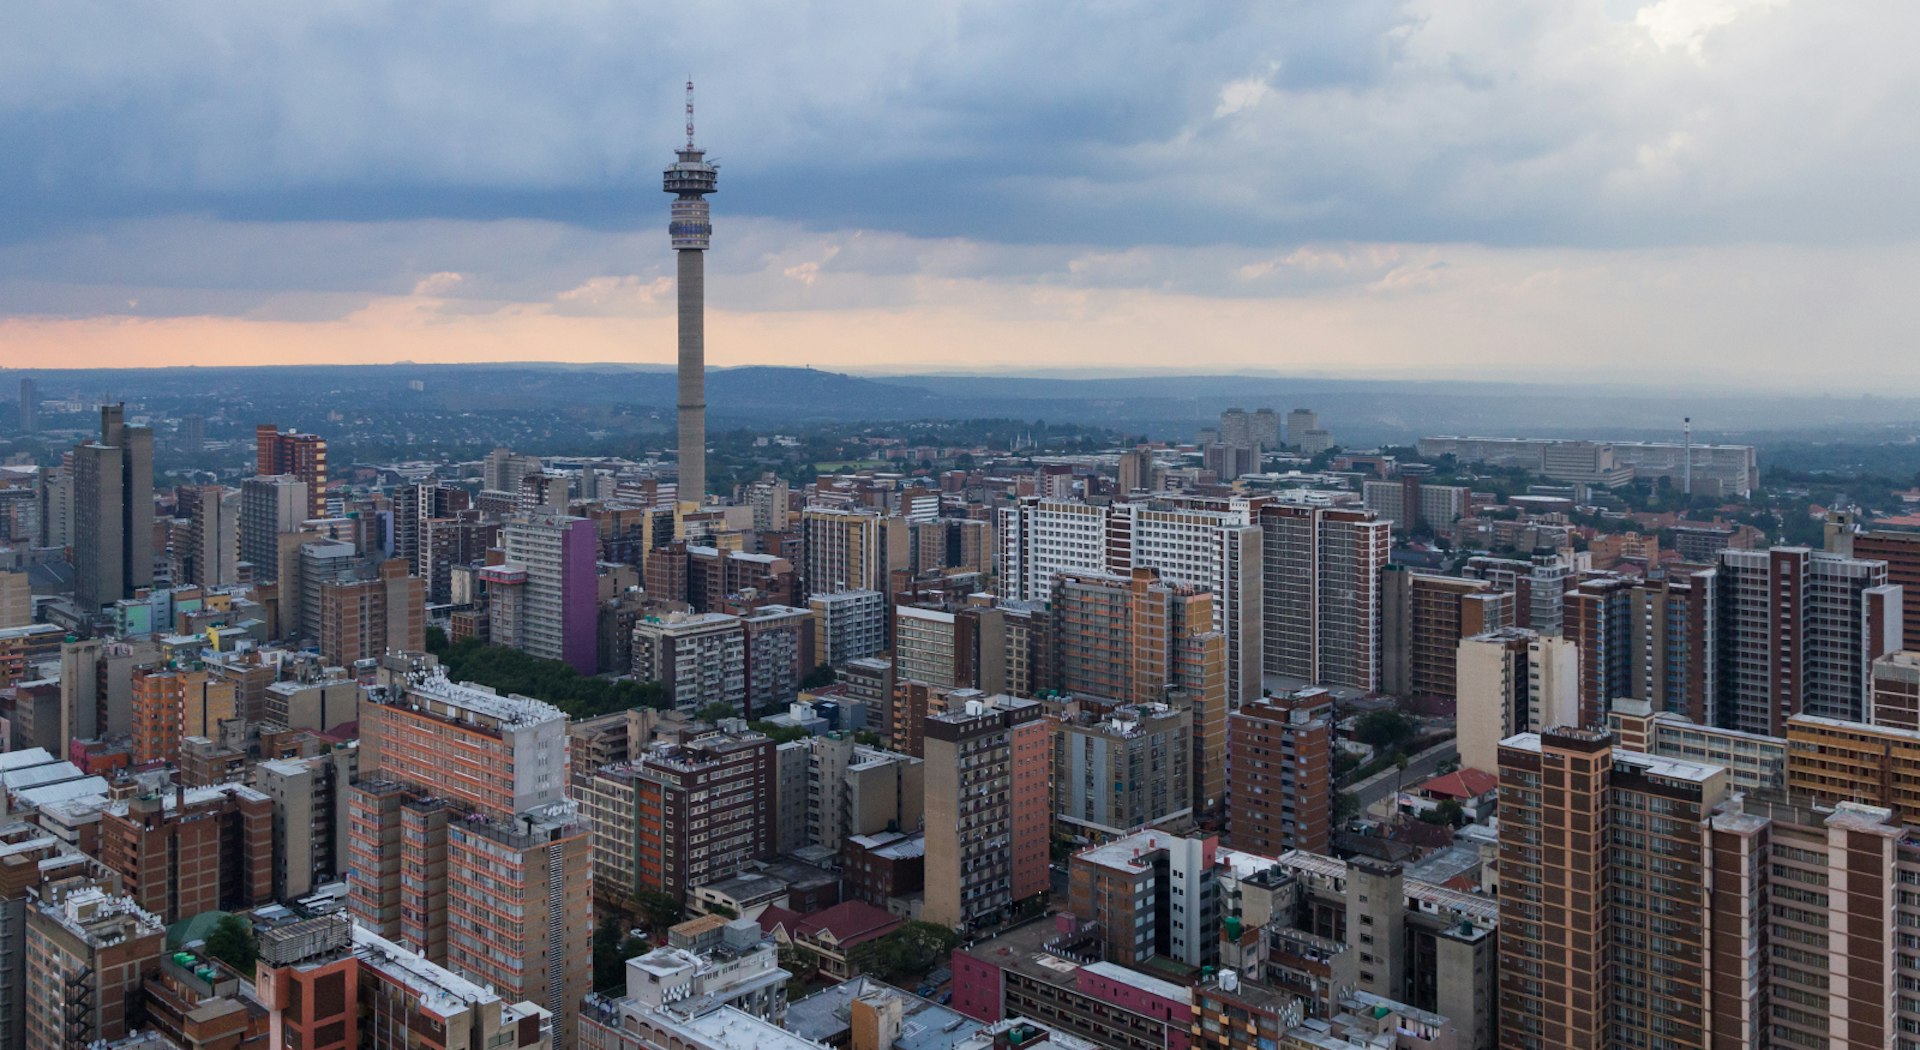 Looking out over downtown Jo'burg's many skyscrapers from 5101, a new events venue in Ponte City cylindrical tower © Heather Mason / Lonely Planet